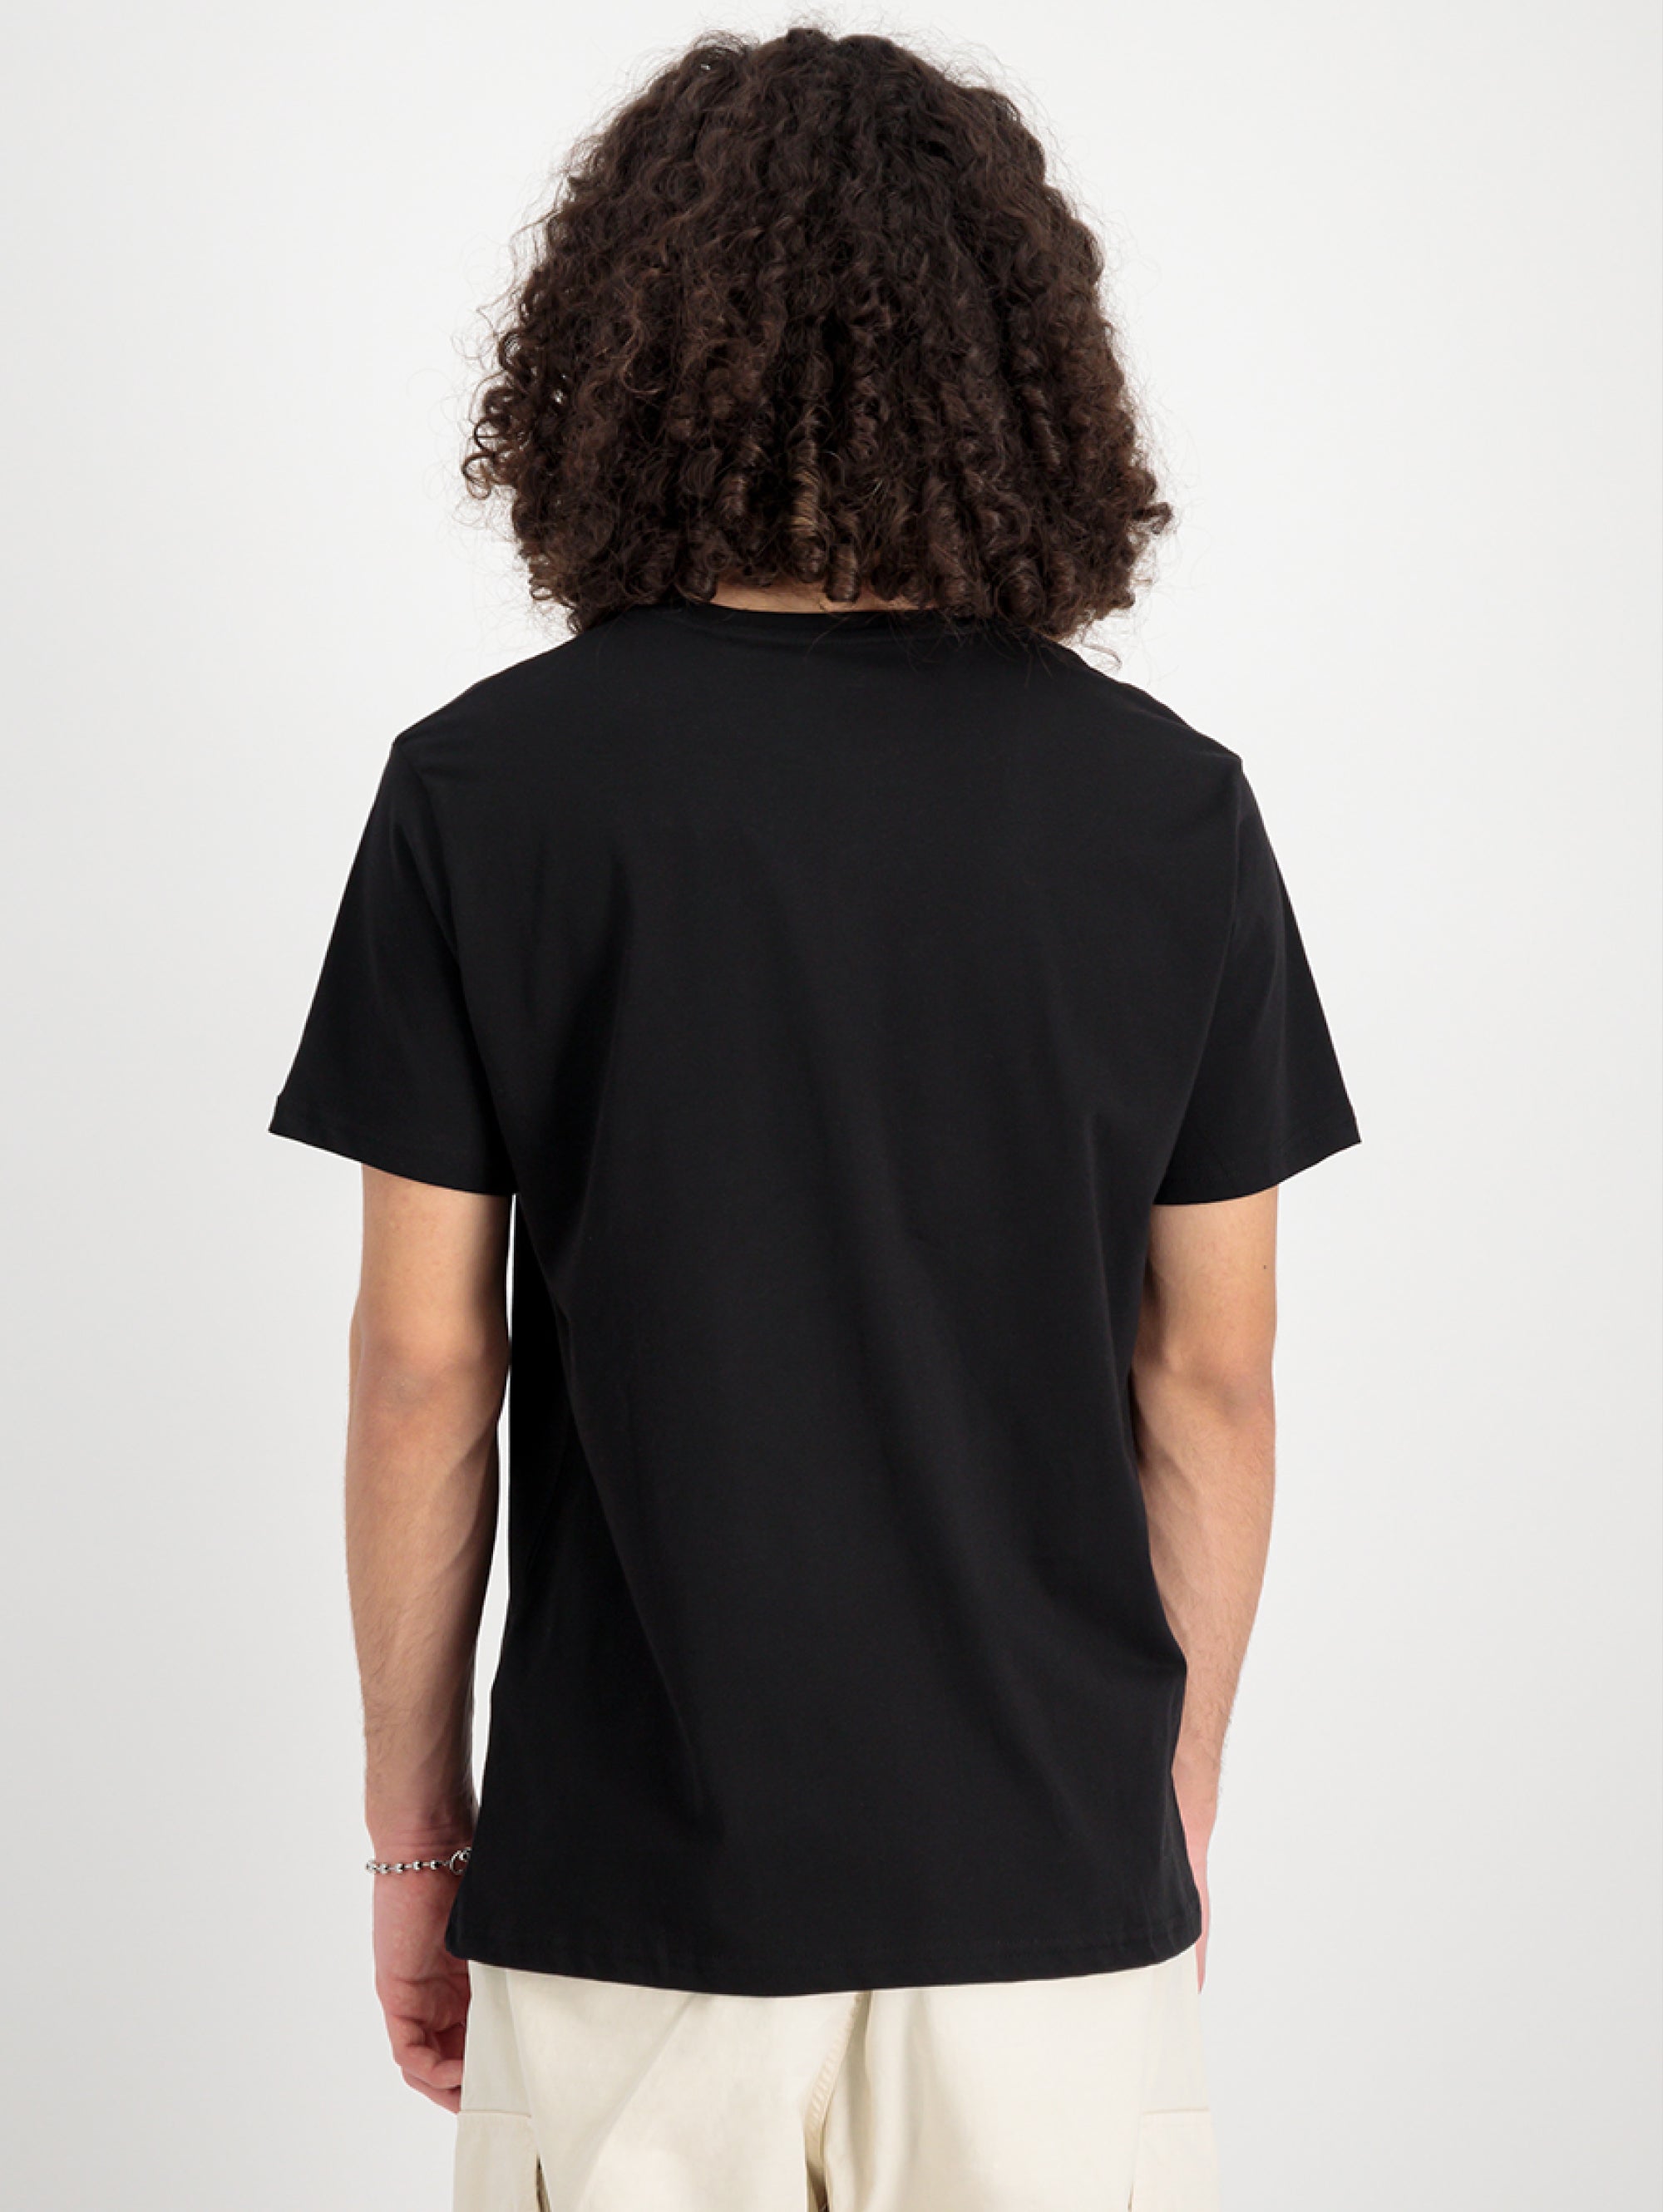 T-shirt with Black Camouflage Print